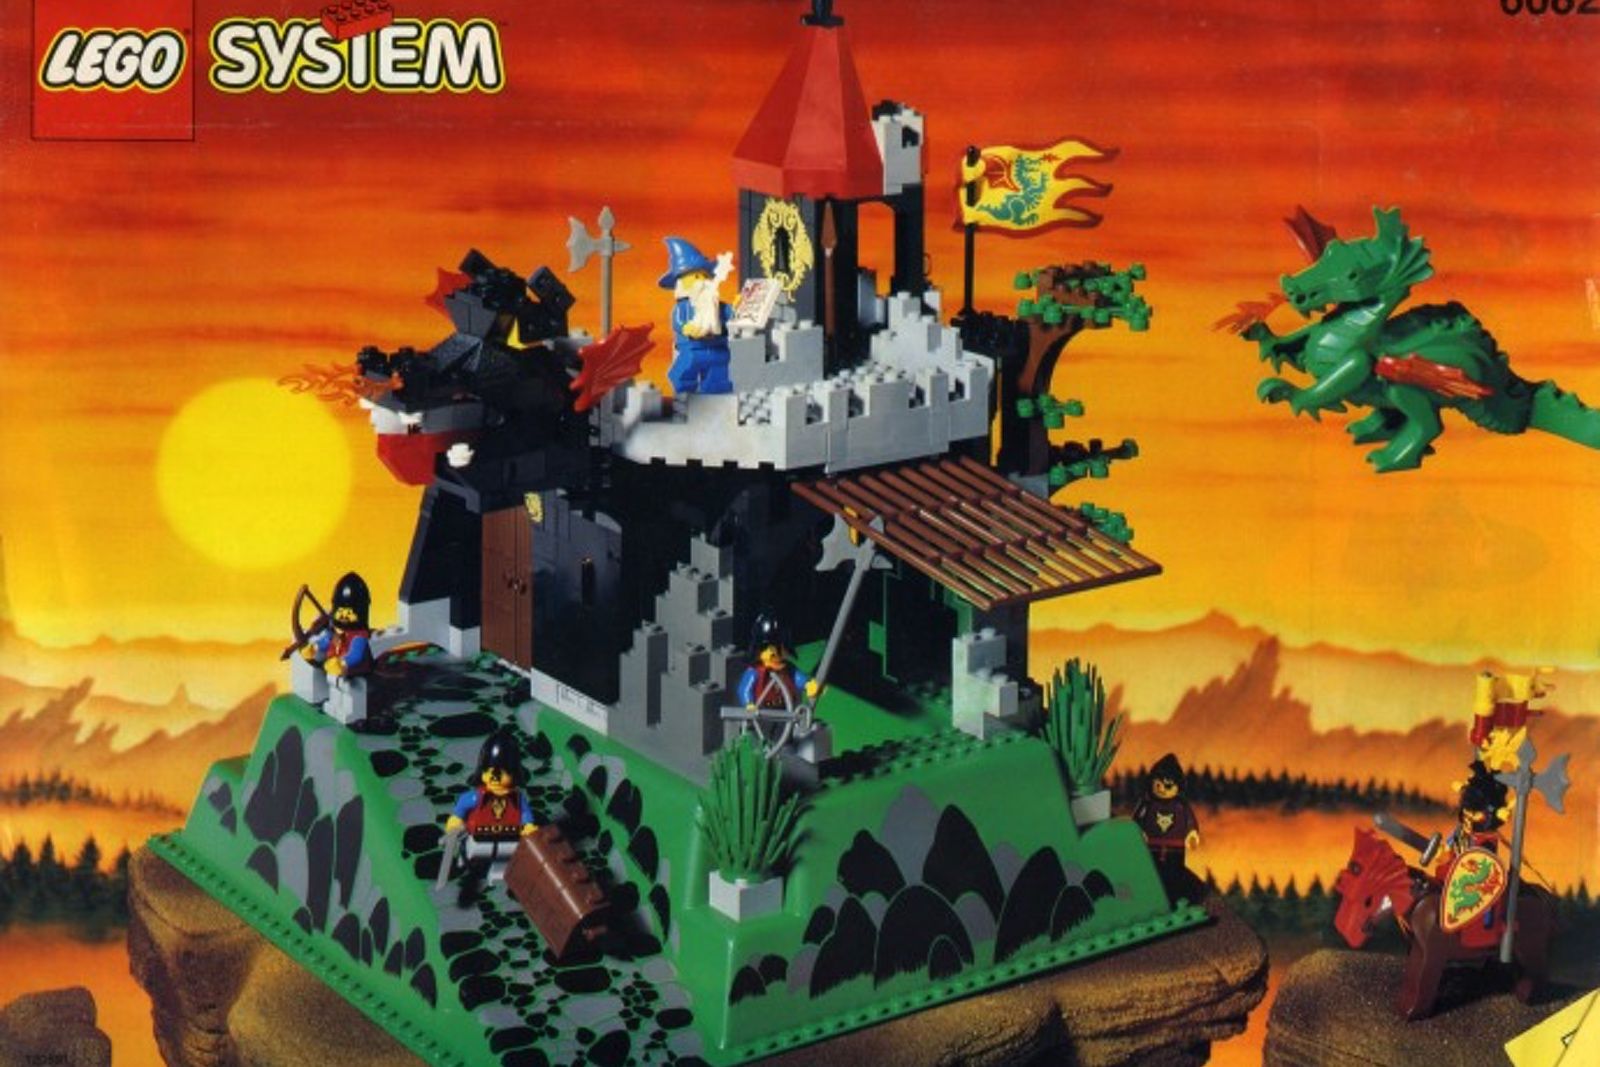 Remember These The Best Lego Sets Of All Time image 199